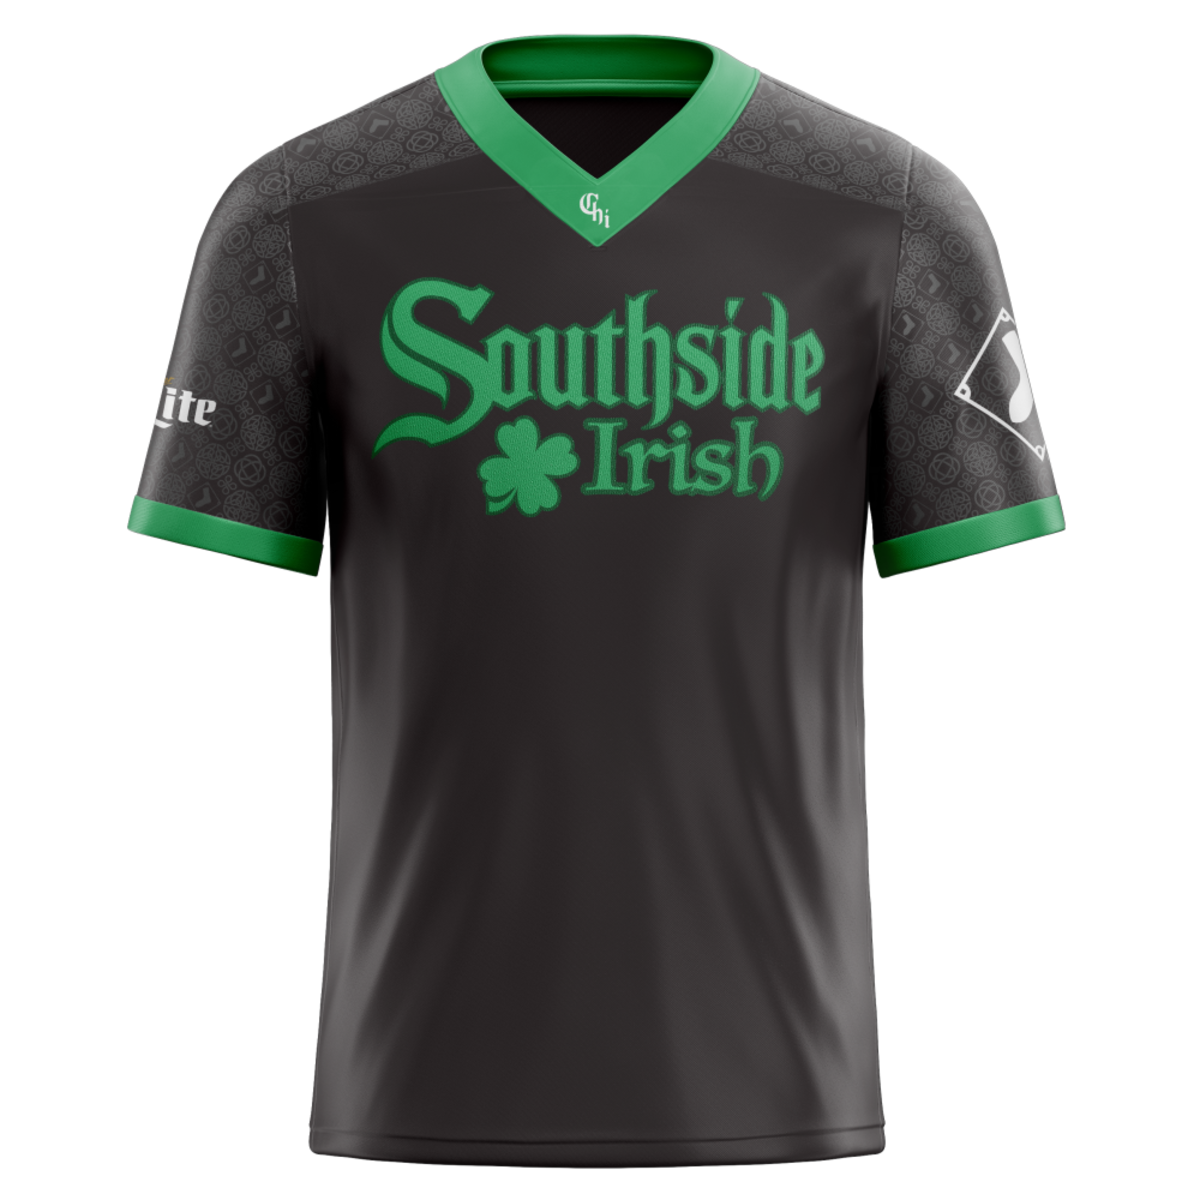 The Chicago White Sox Halfway to St. Patrick's Day Southside Irish soccer jersey giveaway for Saturday, September 16, 2023 vs. the Minnesota Twins